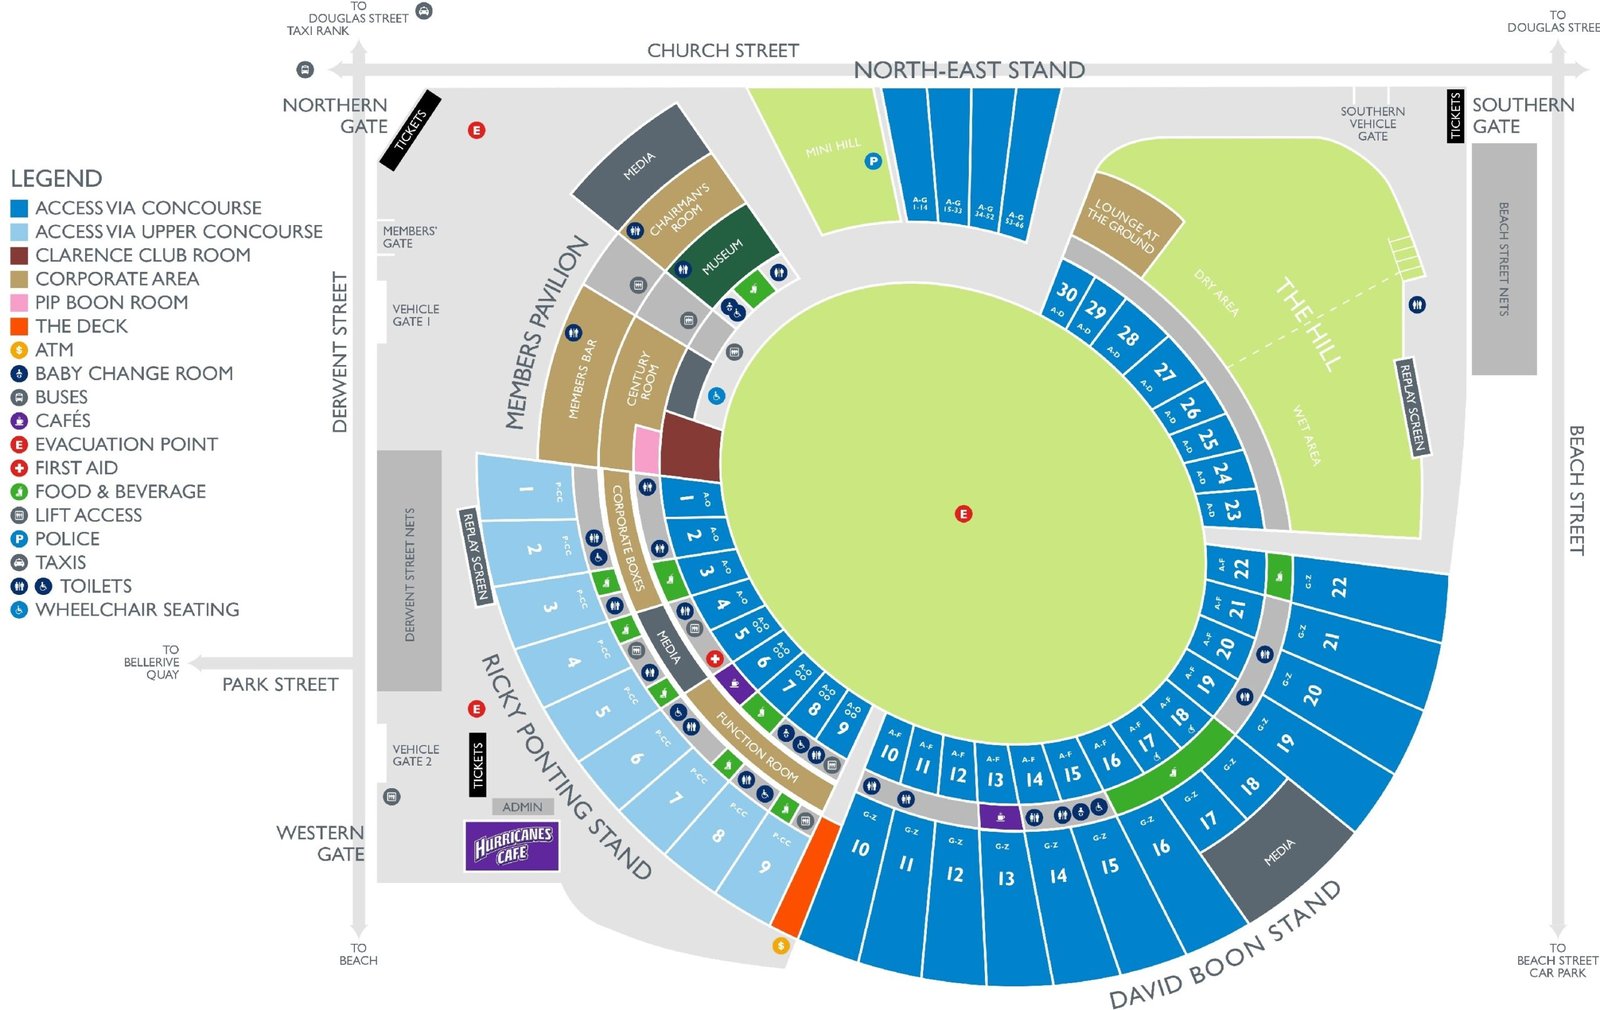 Bellerive Oval Seating Plan with Rows